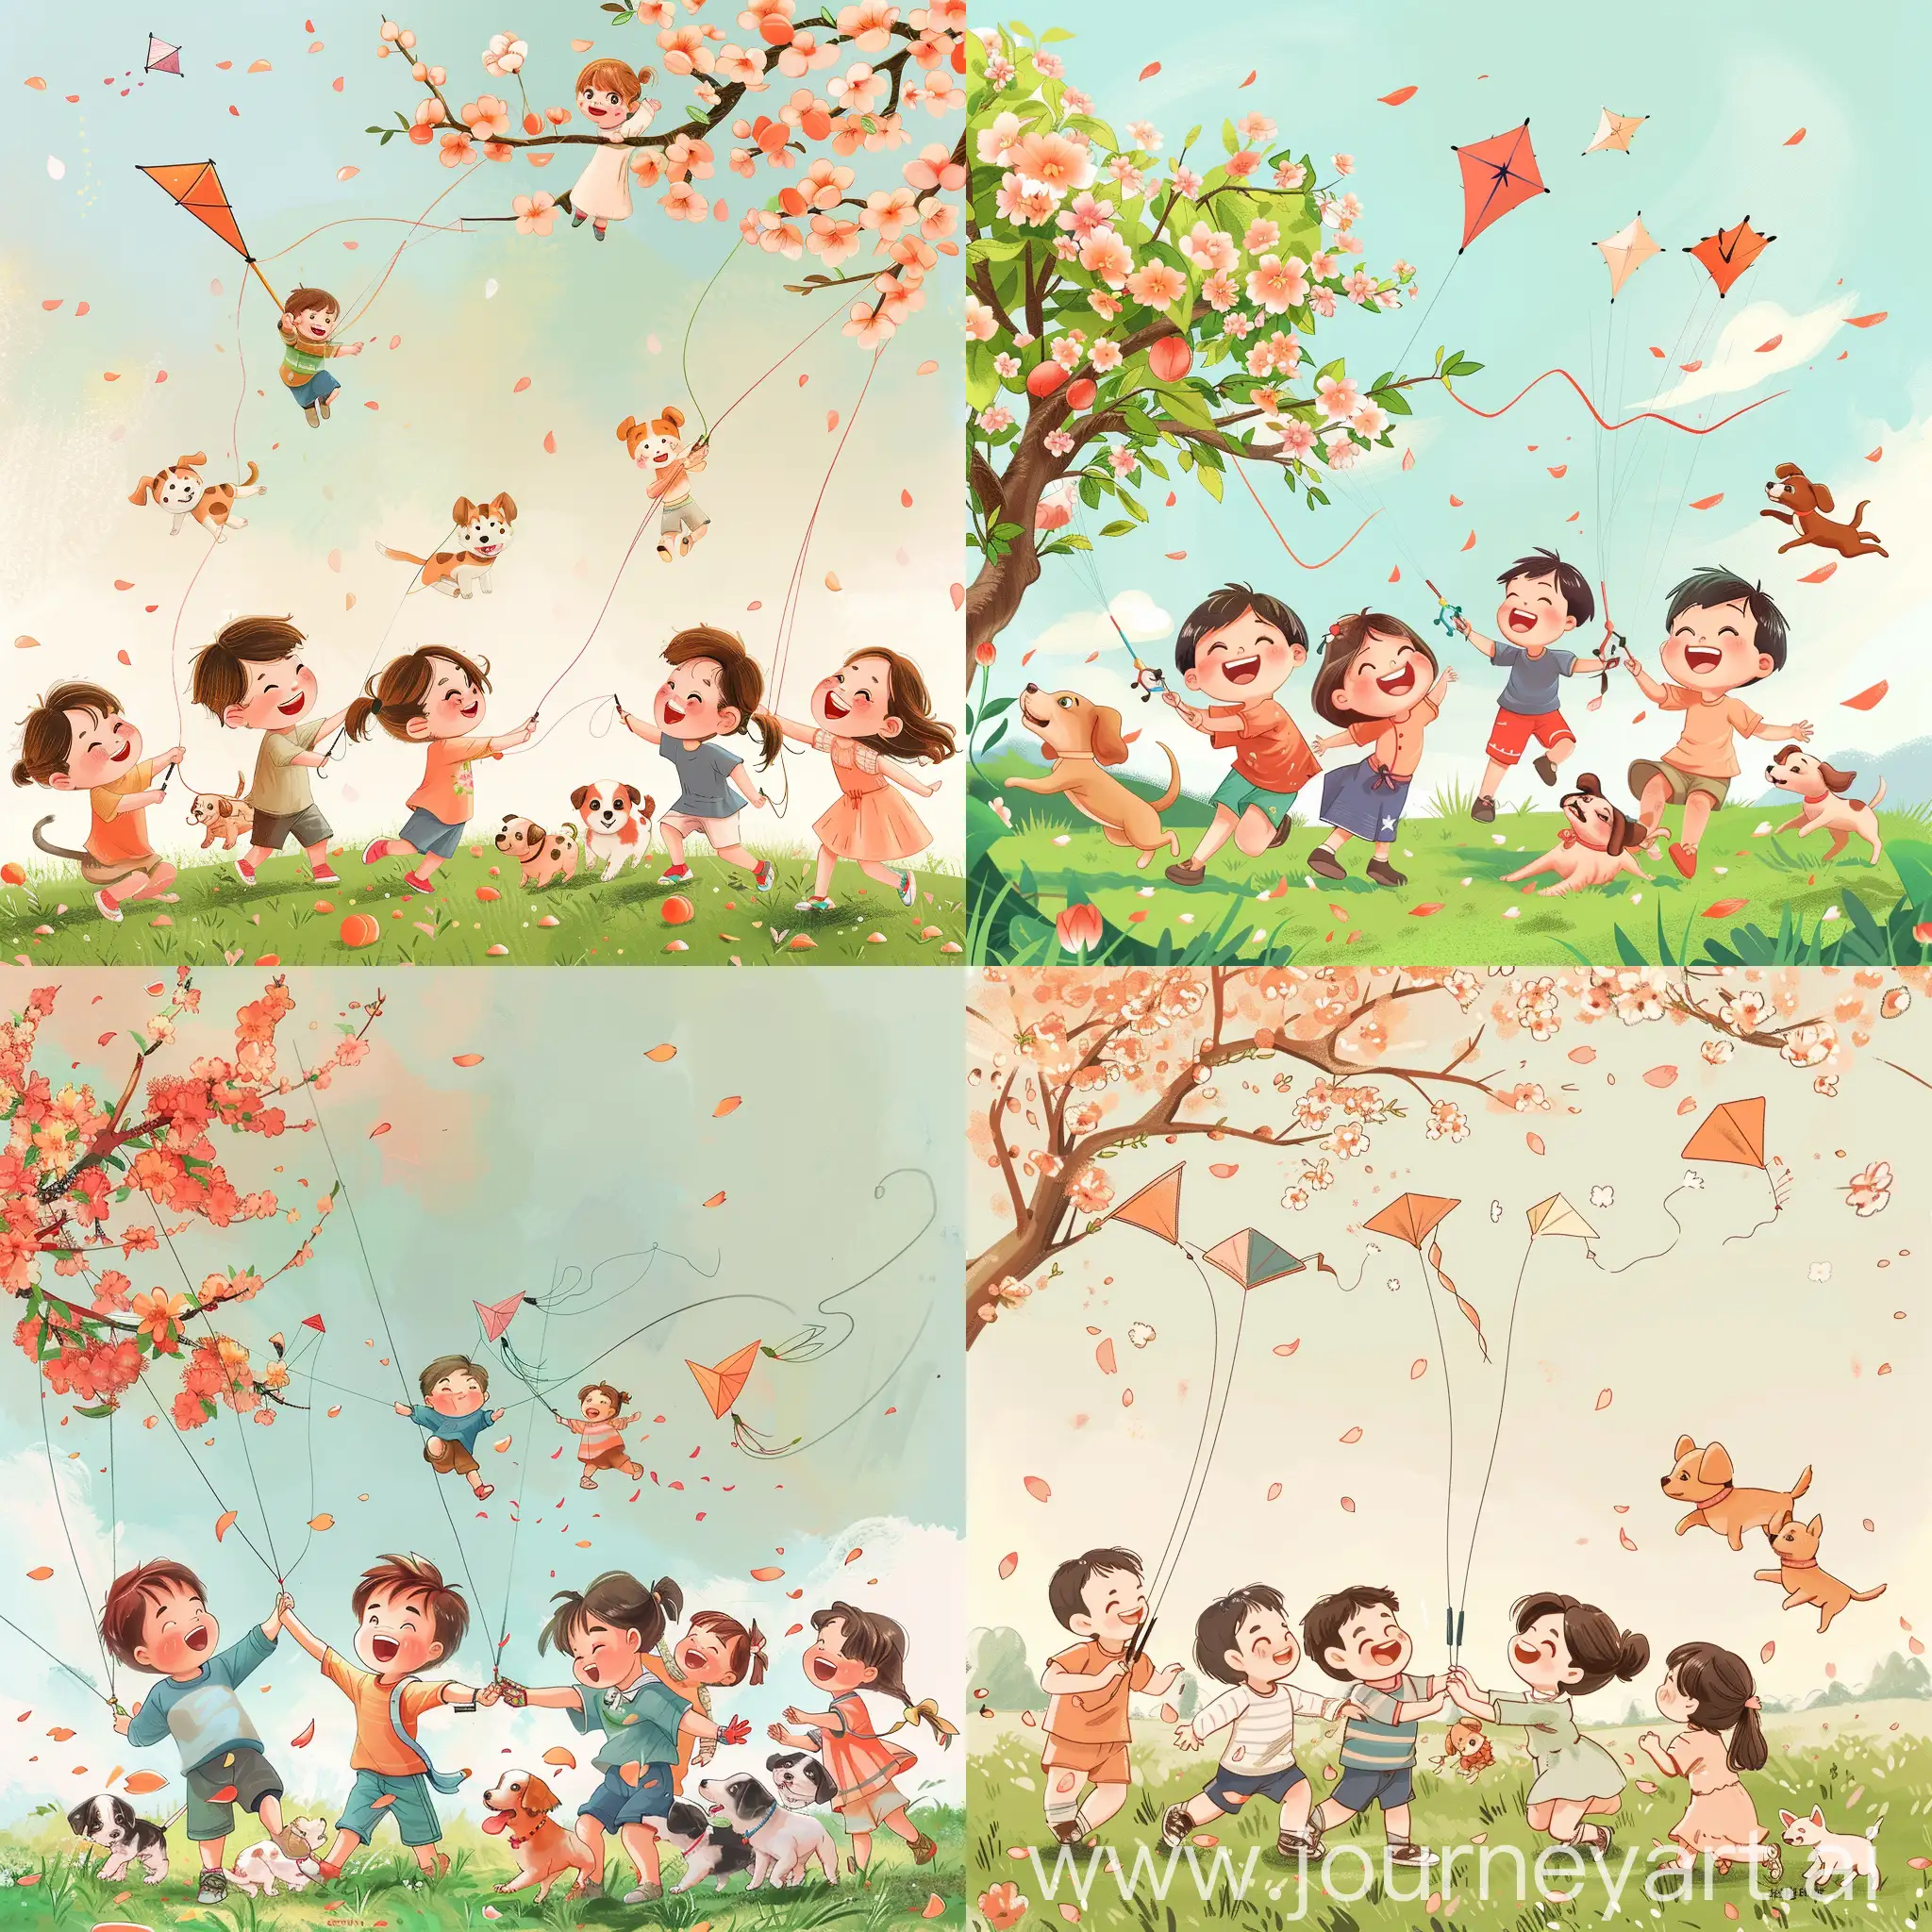 Joyful-Children-Flying-Kites-with-Puppies-in-Blossomfilled-Park